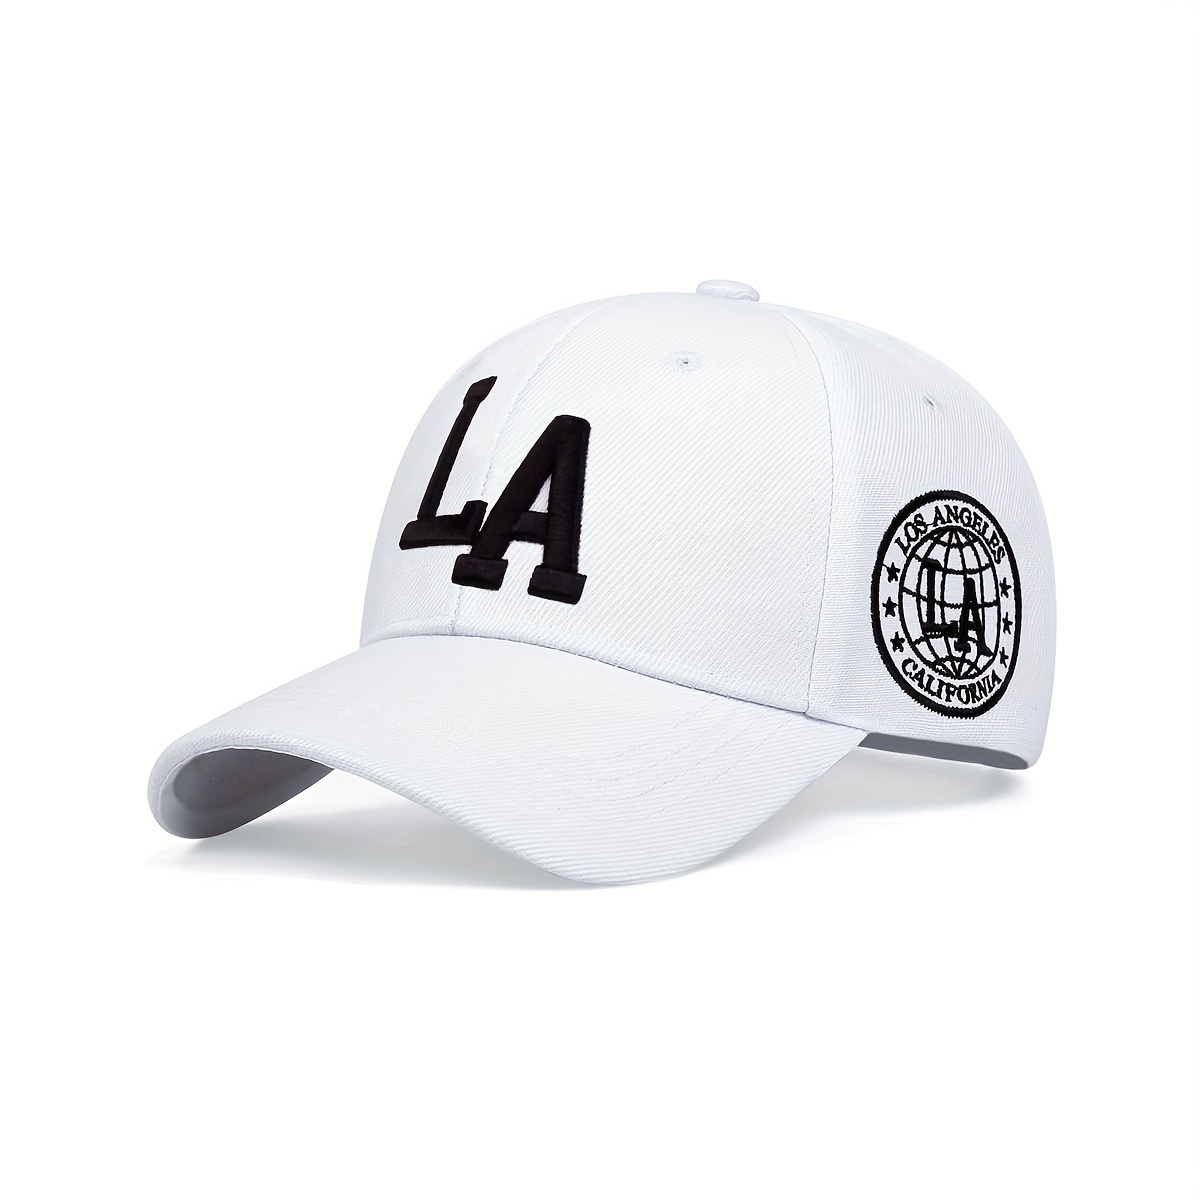 

La Embroidered Baseball Caps For Women, Fashionable Sunshade Hats With Adjustable Strap, Versatile Sport Cap